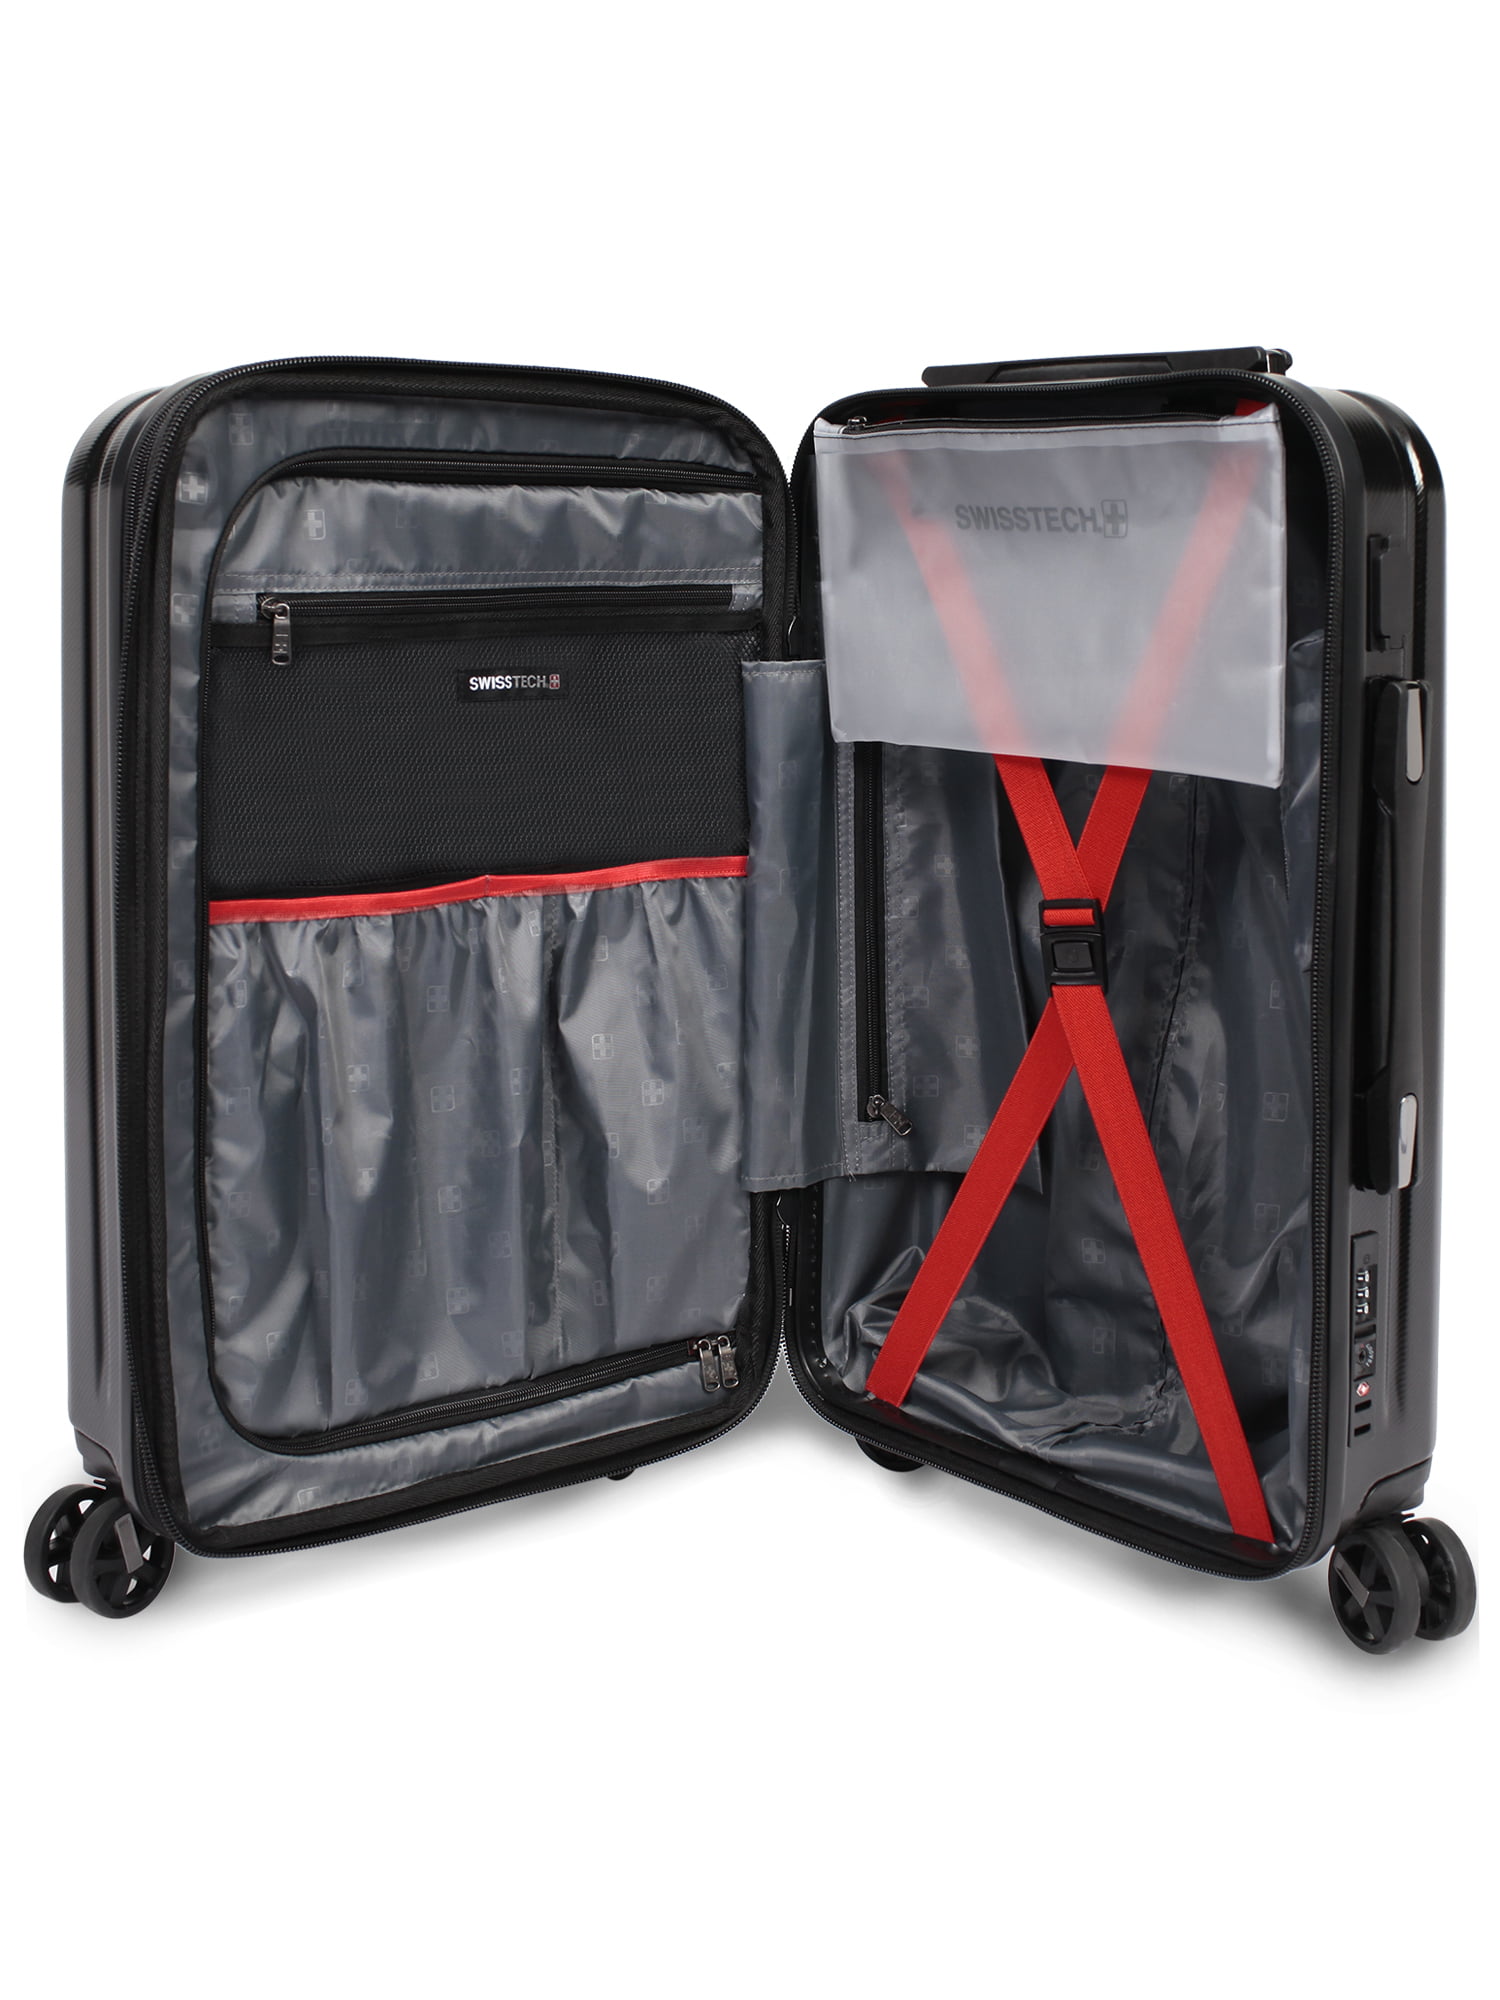 Buy Executive Set 2 Piece Set (Backpack / Carry-On) for USD 160.99